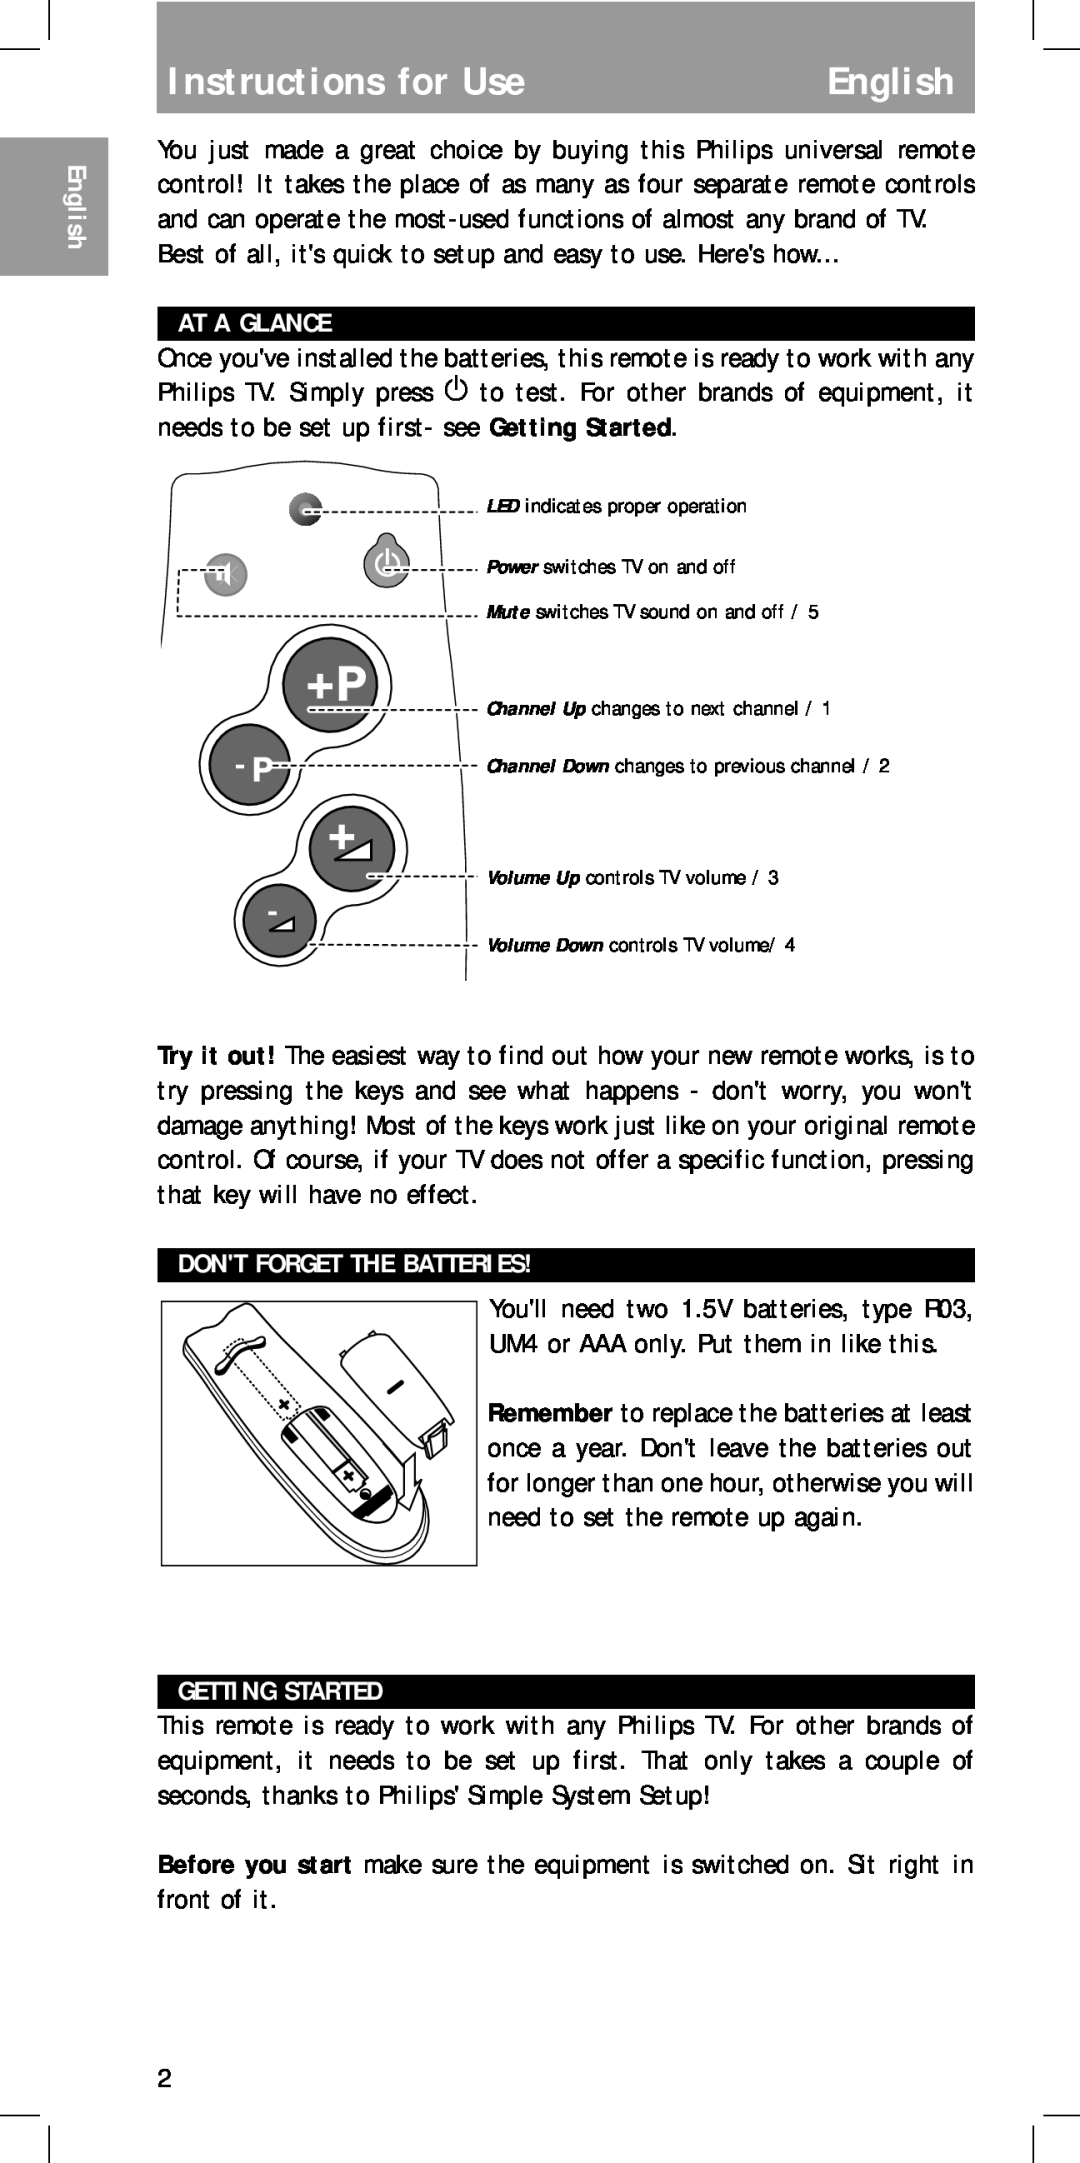 Philips MC-110 manual Instructions for Use, English, At A Glance, Dont Forget The Batteries, Getting Started 